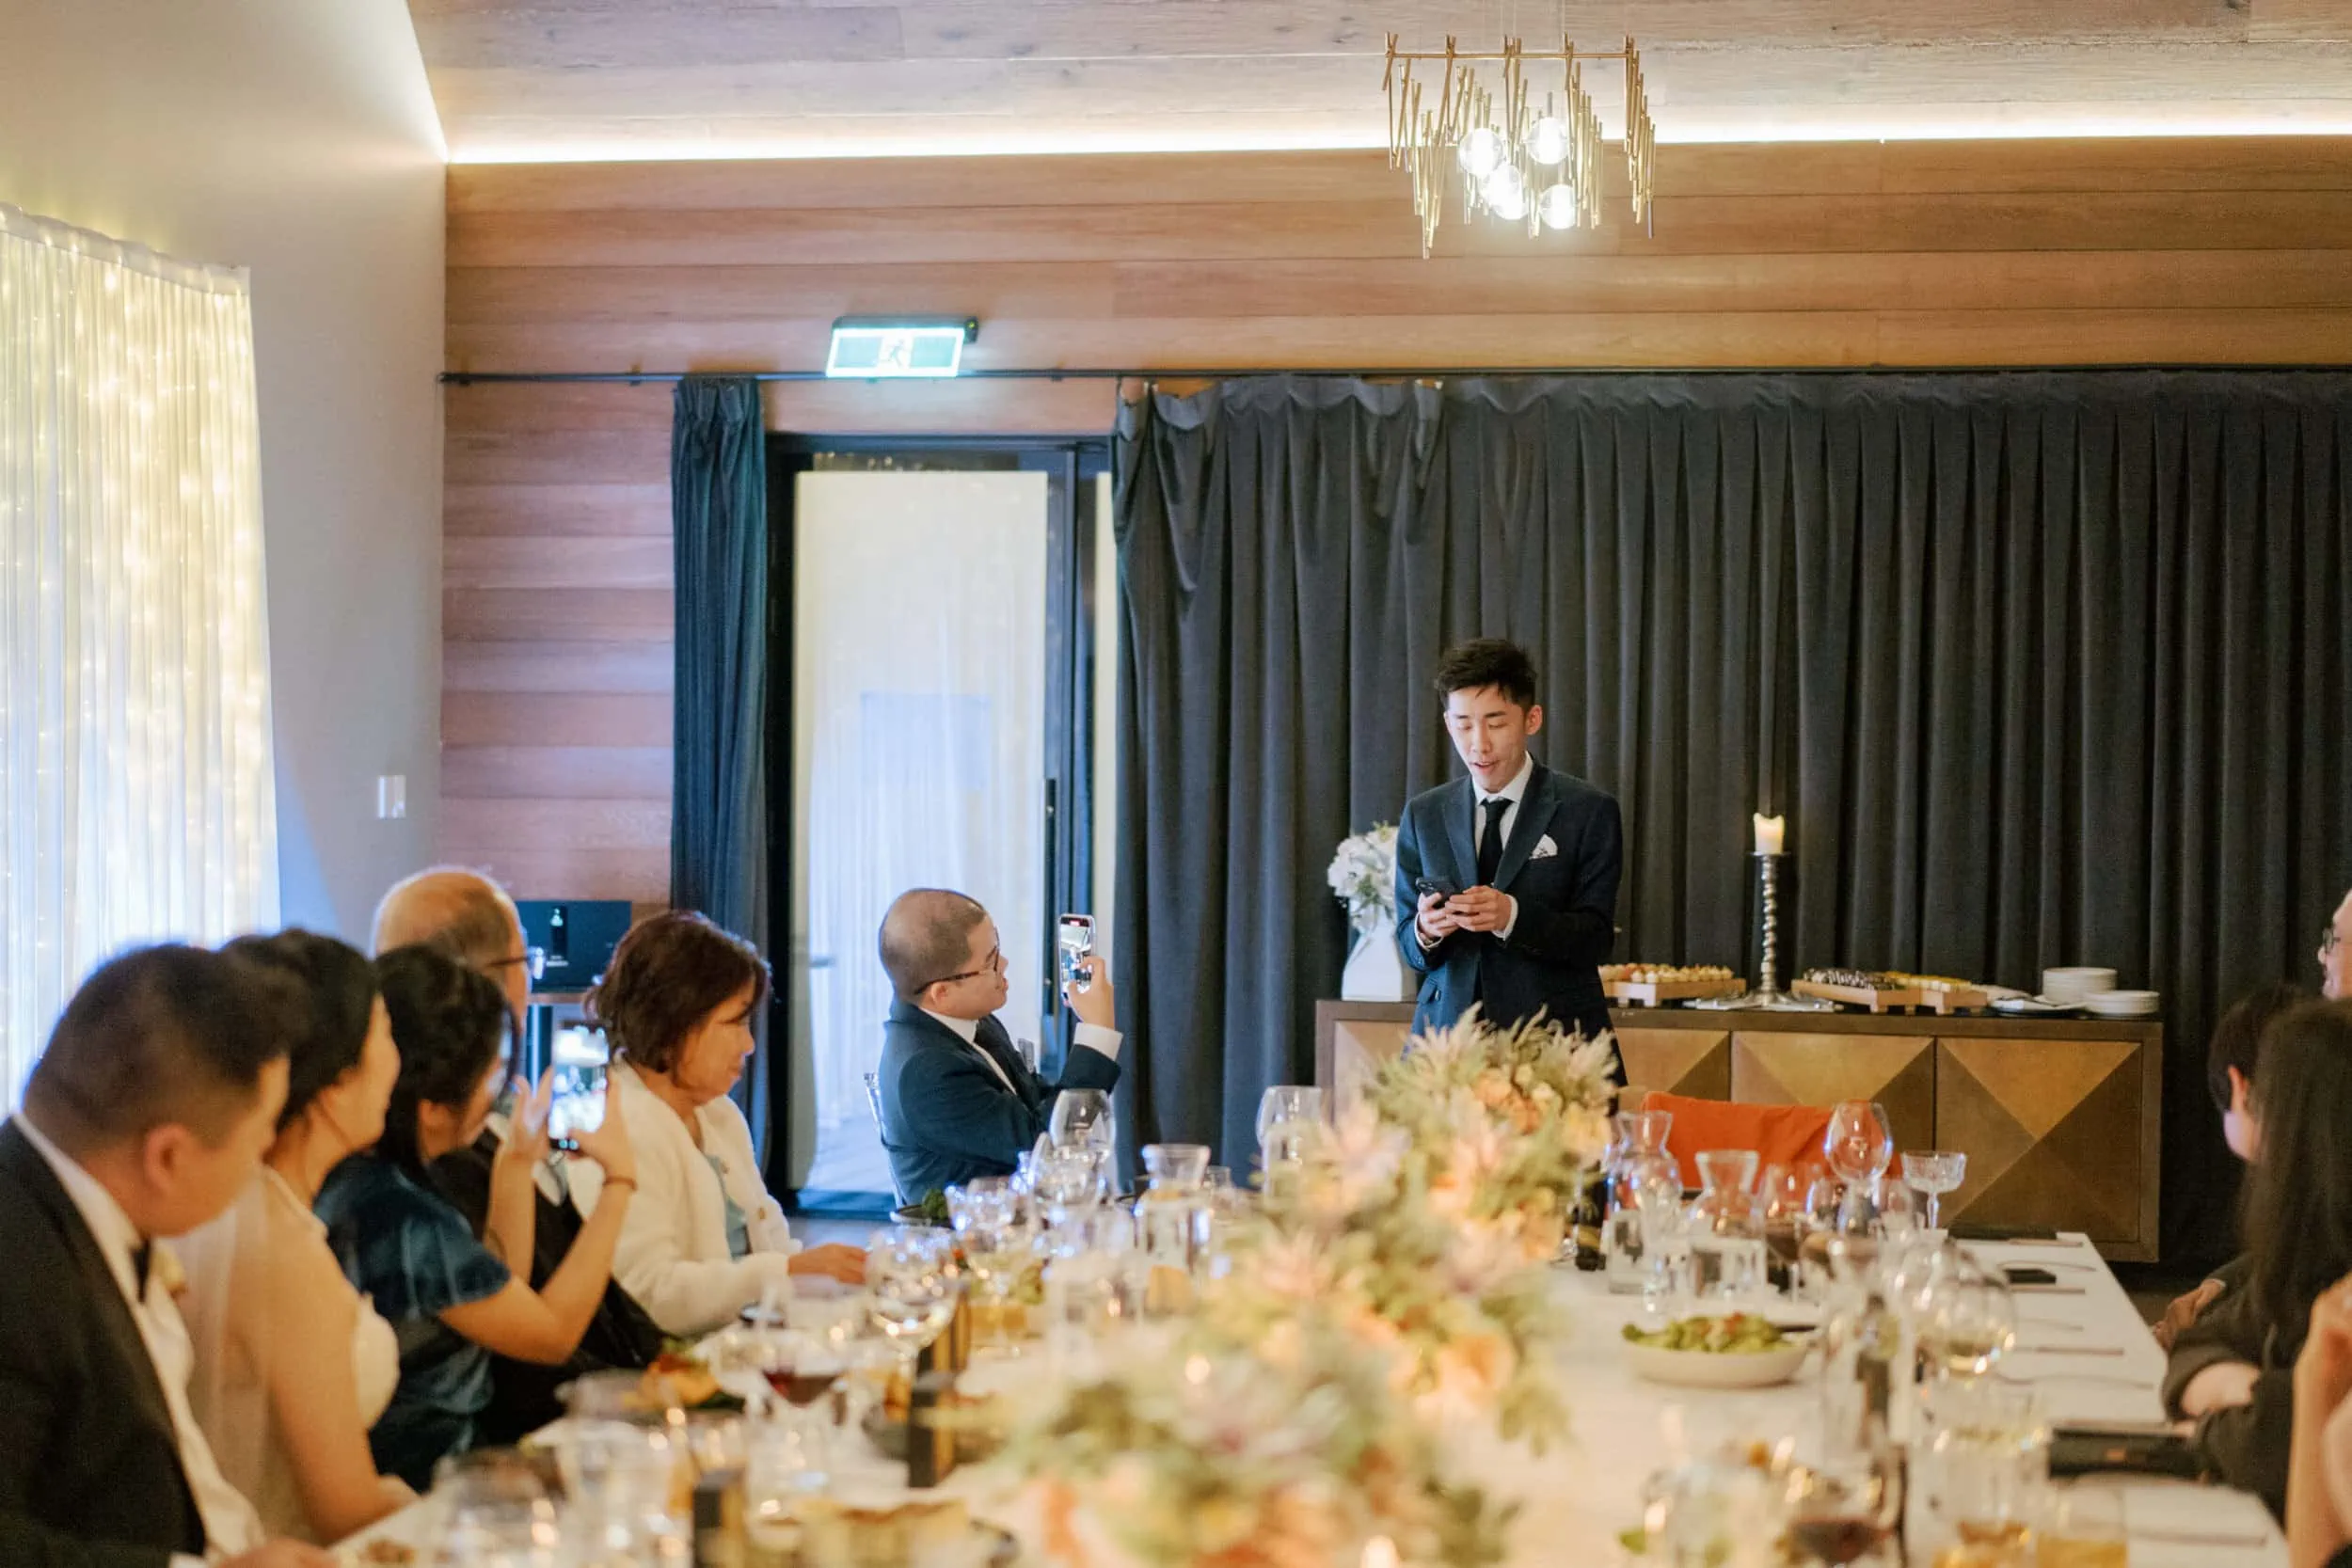 Queenstown New Zealand Elopement Wedding Photographer - A man giving a speech at Lam and Wendy's wedding reception at Kamana Lakehouse.